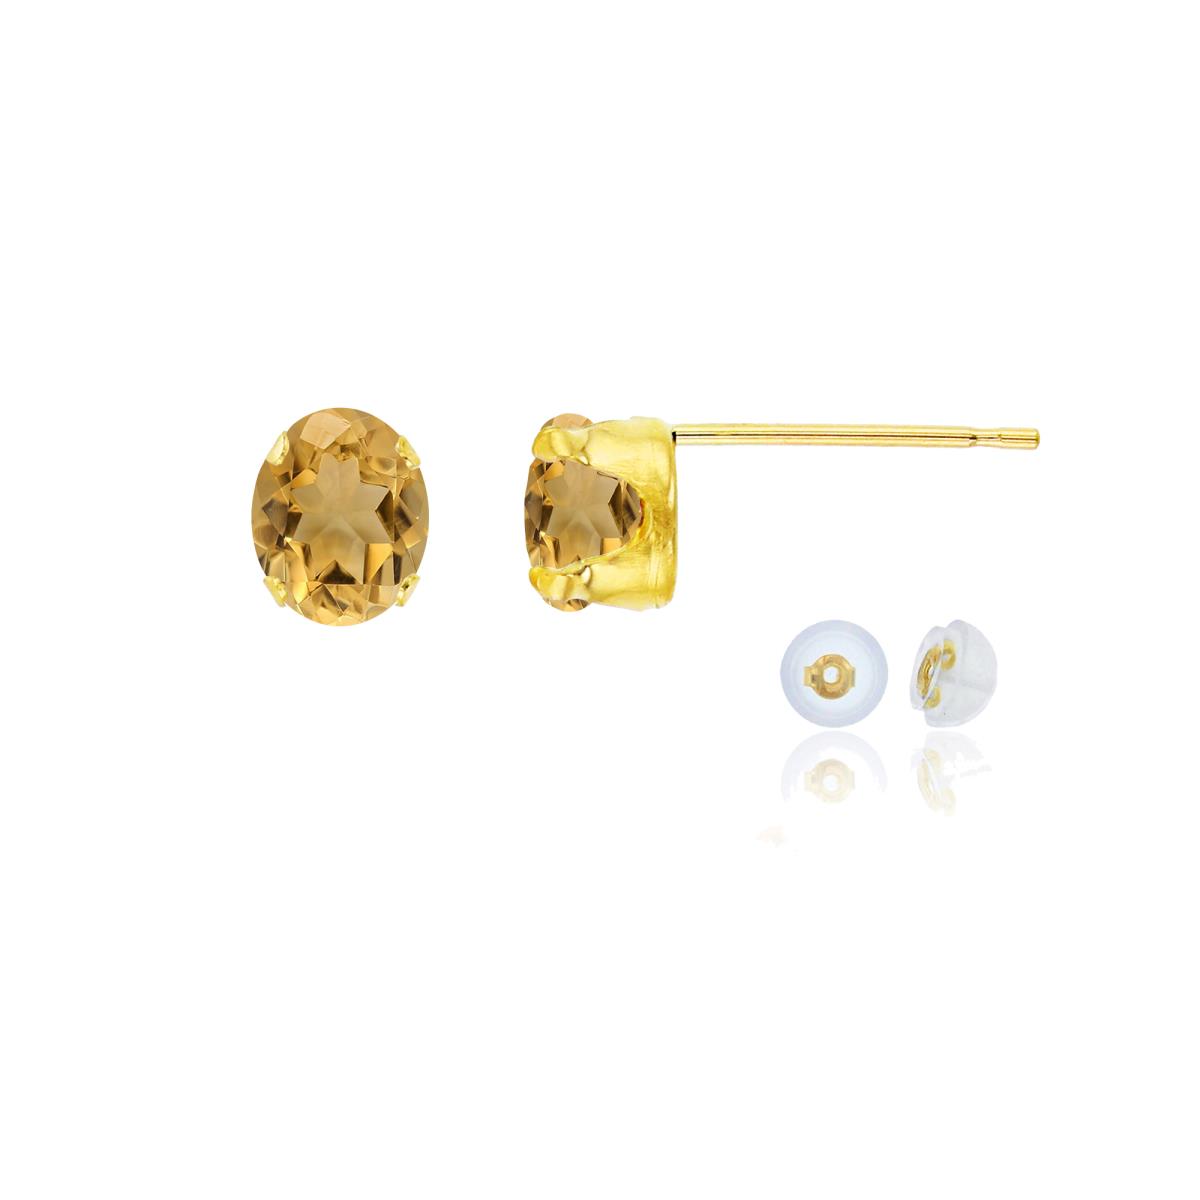 10K Yellow Gold 6x4mm Oval Citrine Stud Earring with Silicone Back